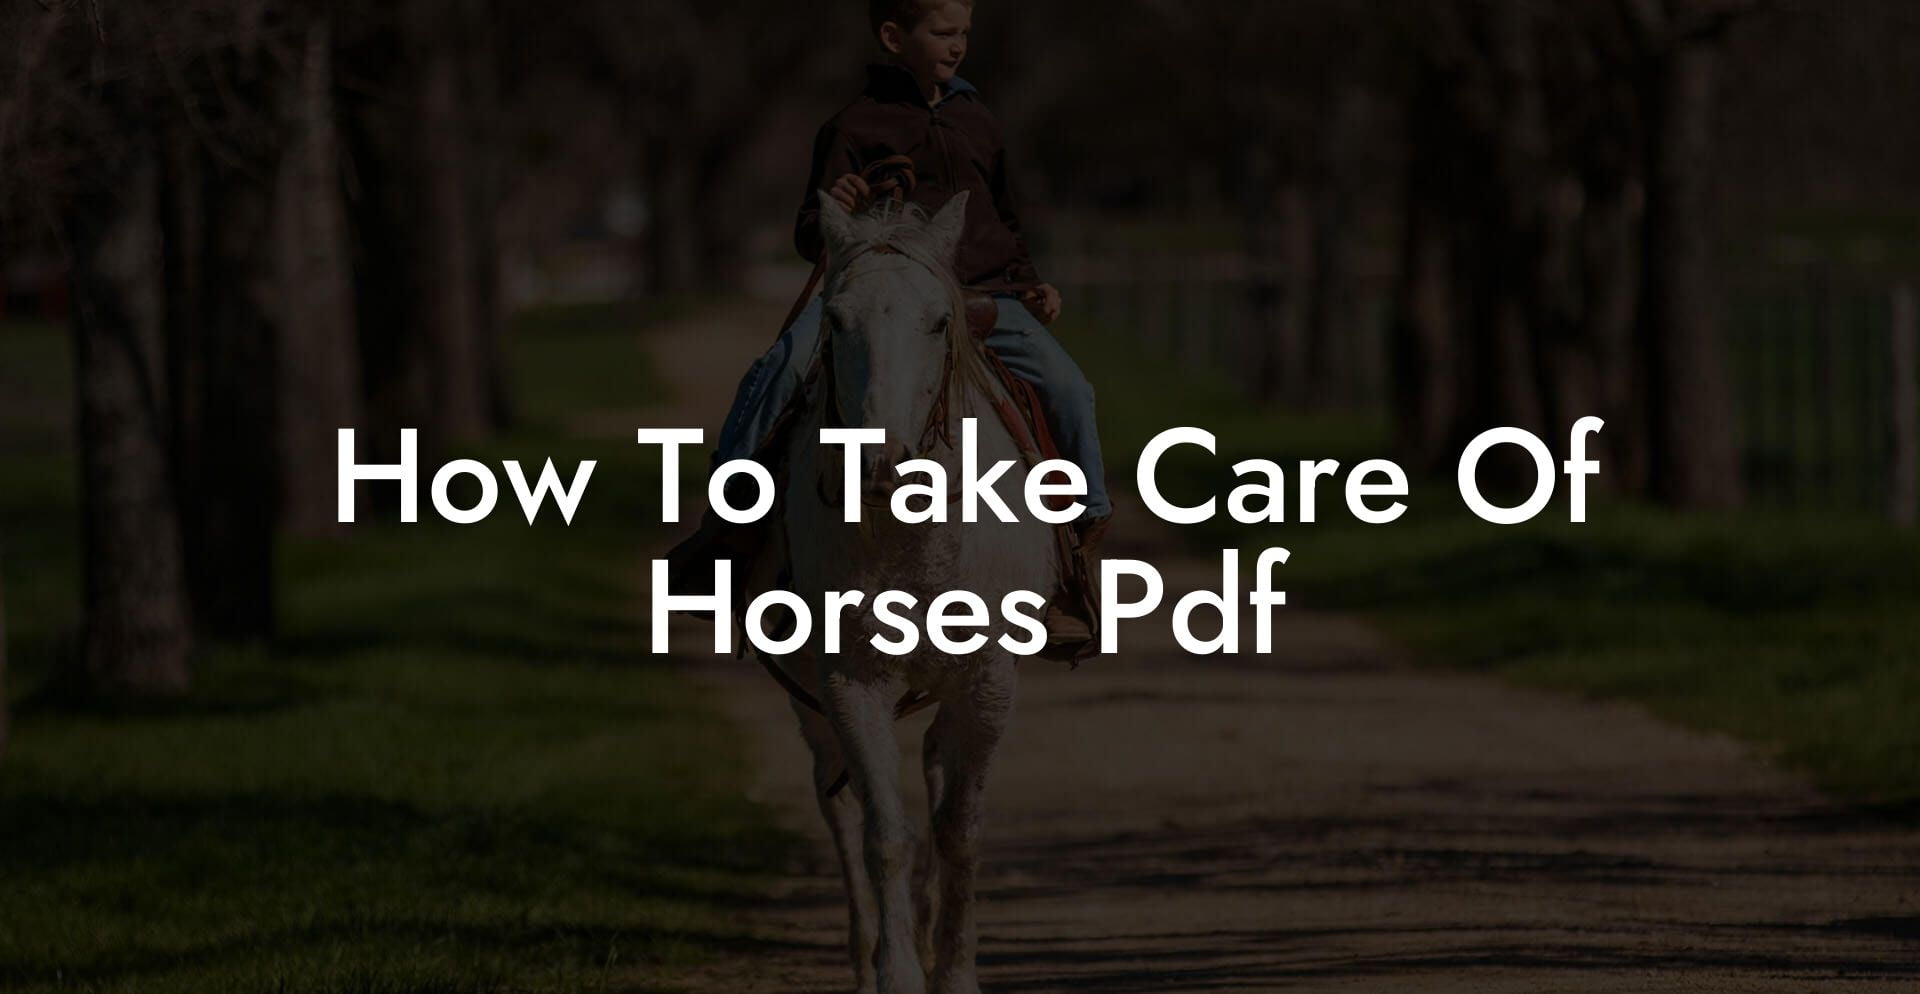 How To Take Care Of Horses Pdf